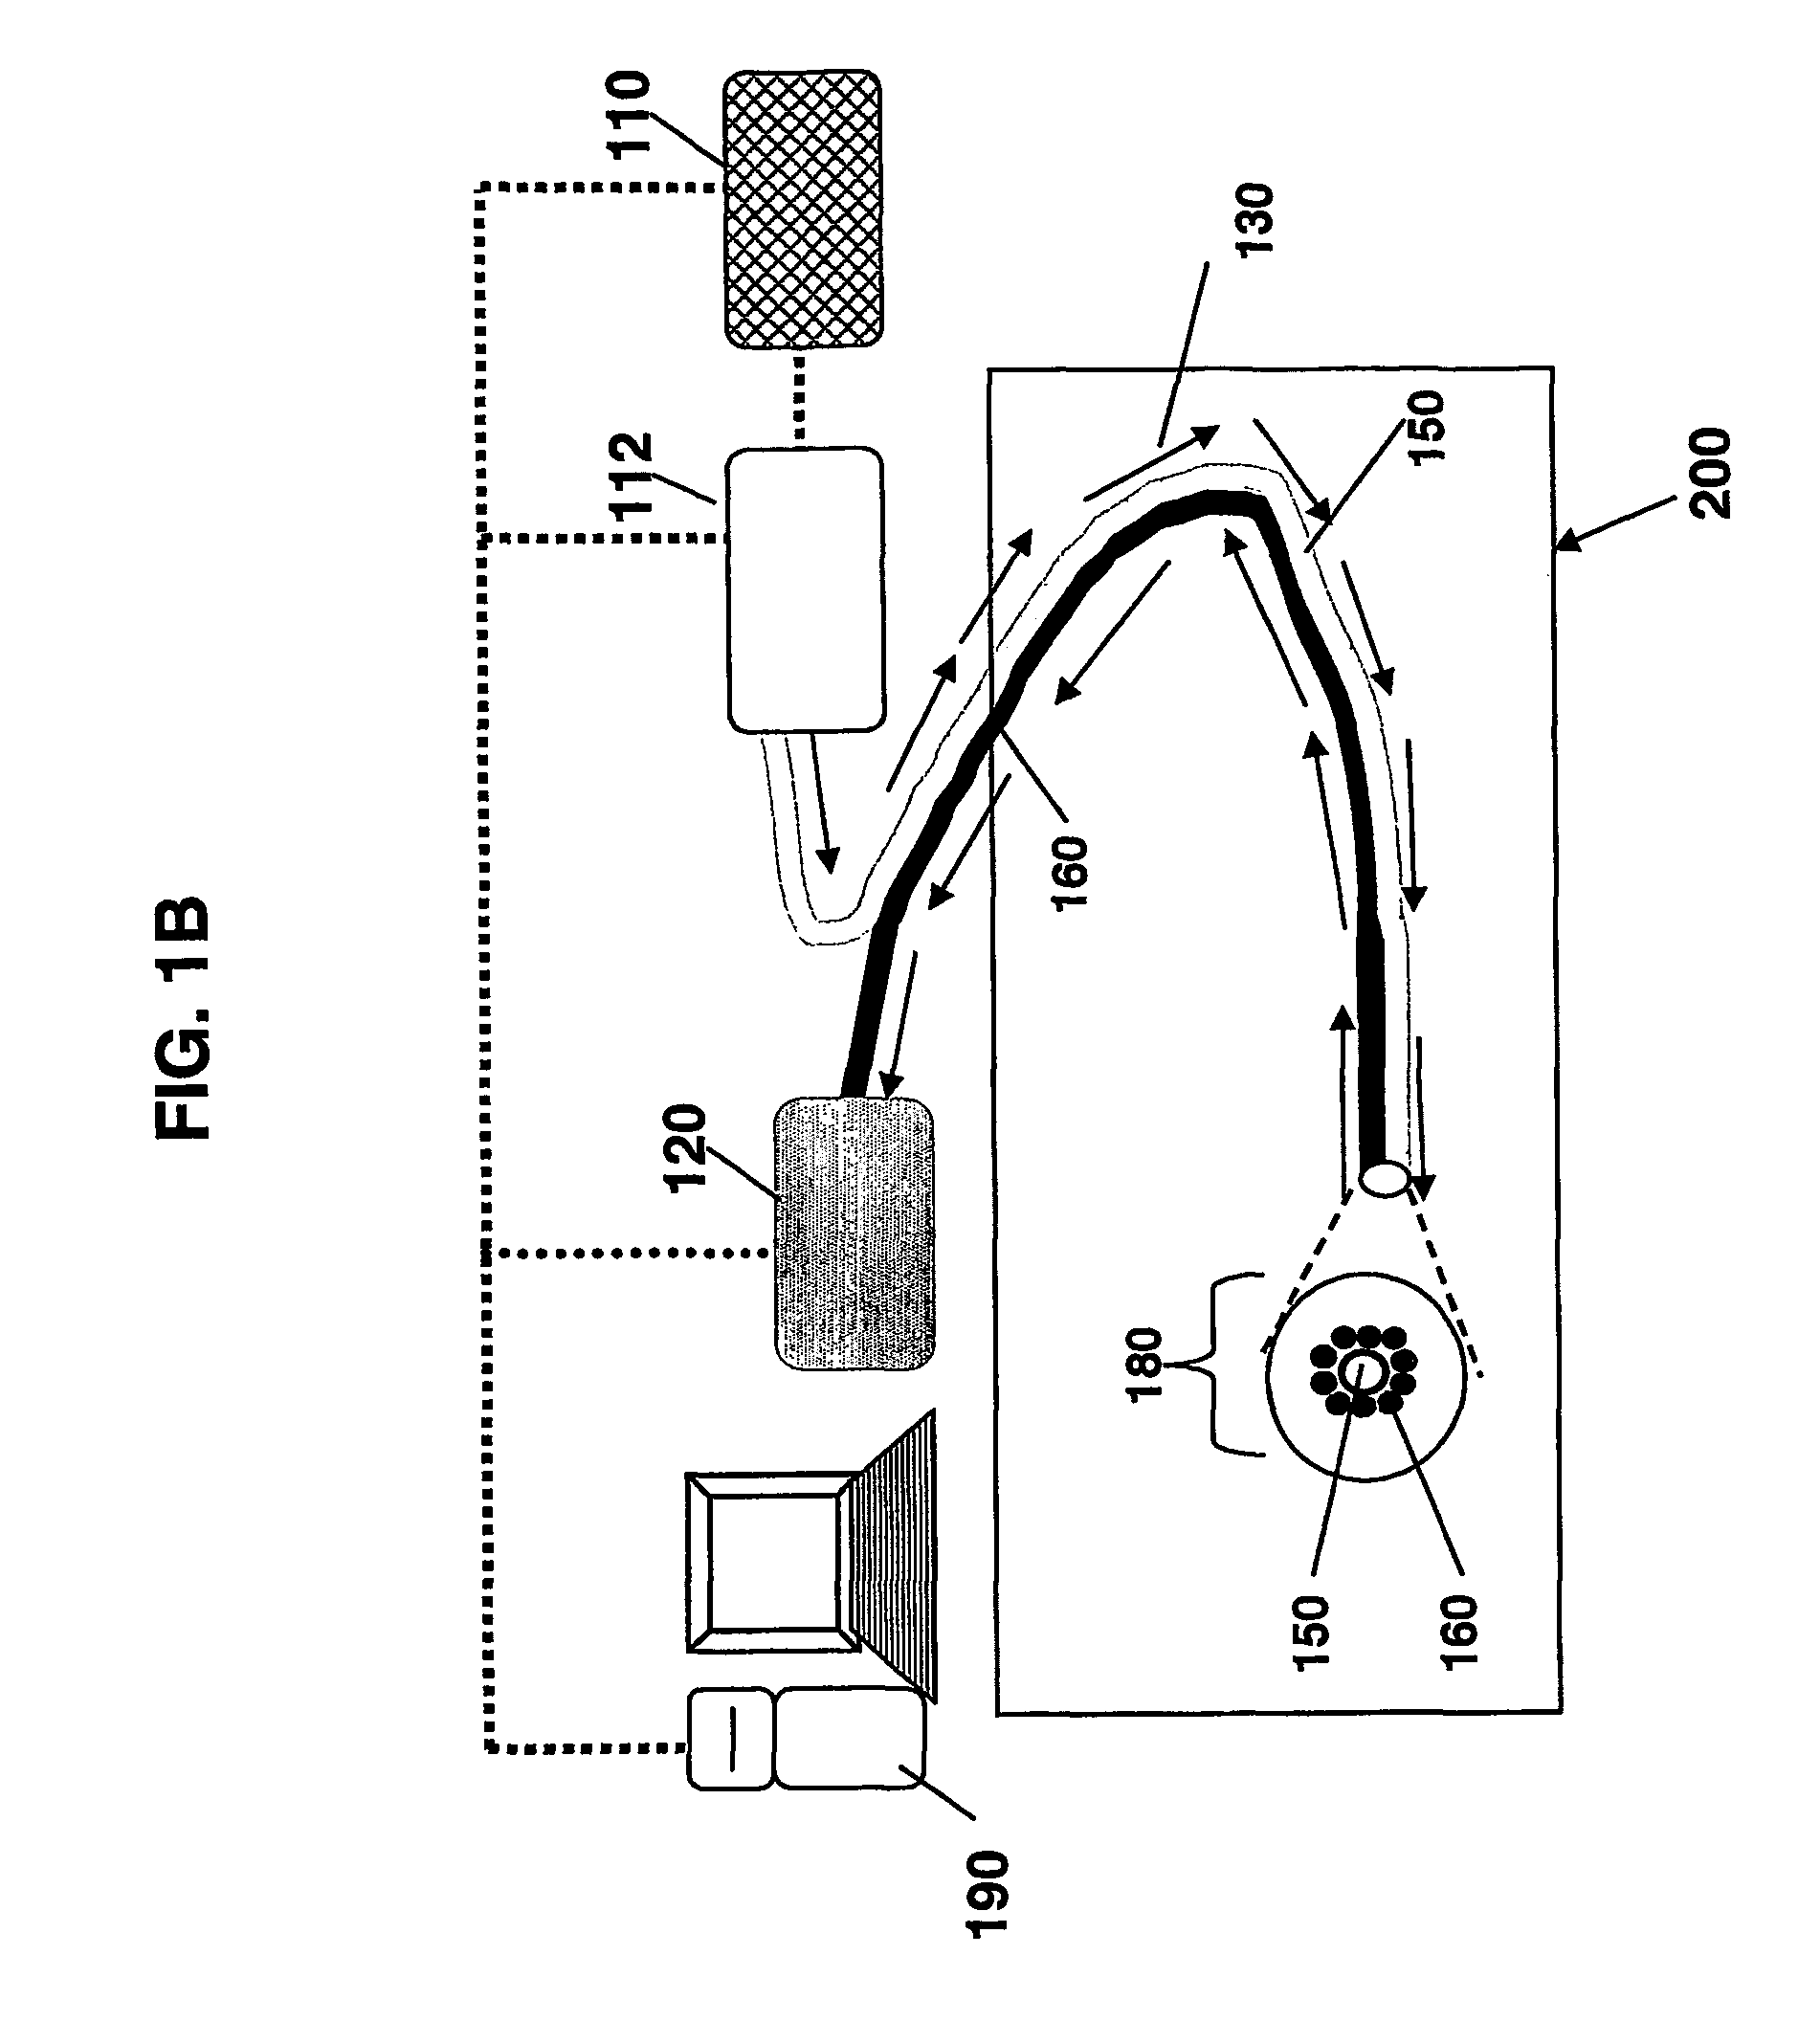 Catheter based mid-infrared reflectance and reflectance generated absorption spectroscopy